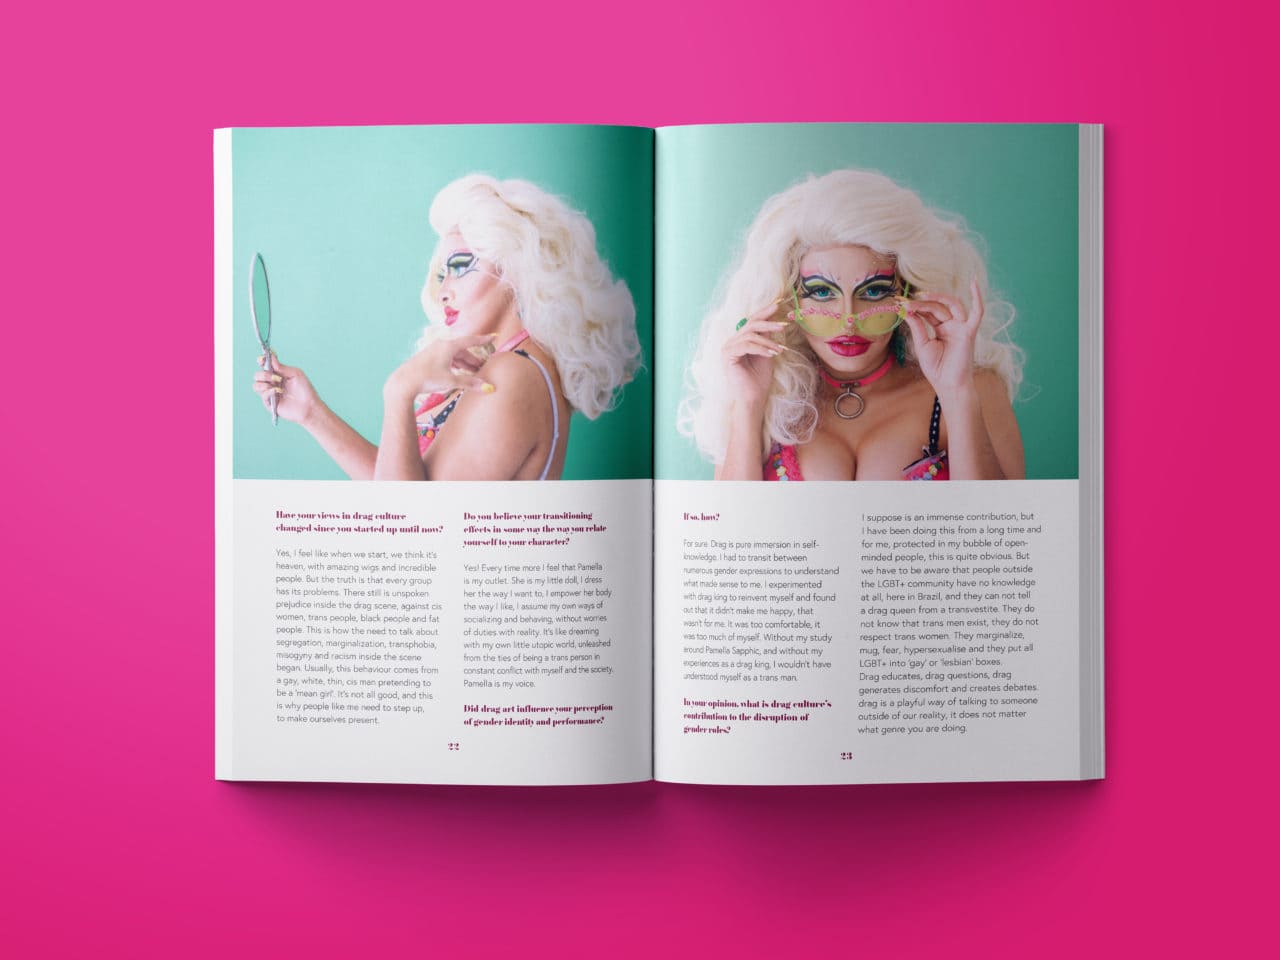 On the left page of Vagina-nomics, there is a drag queen looking in a mirror and on the right there is the same drag queen with green glasses.